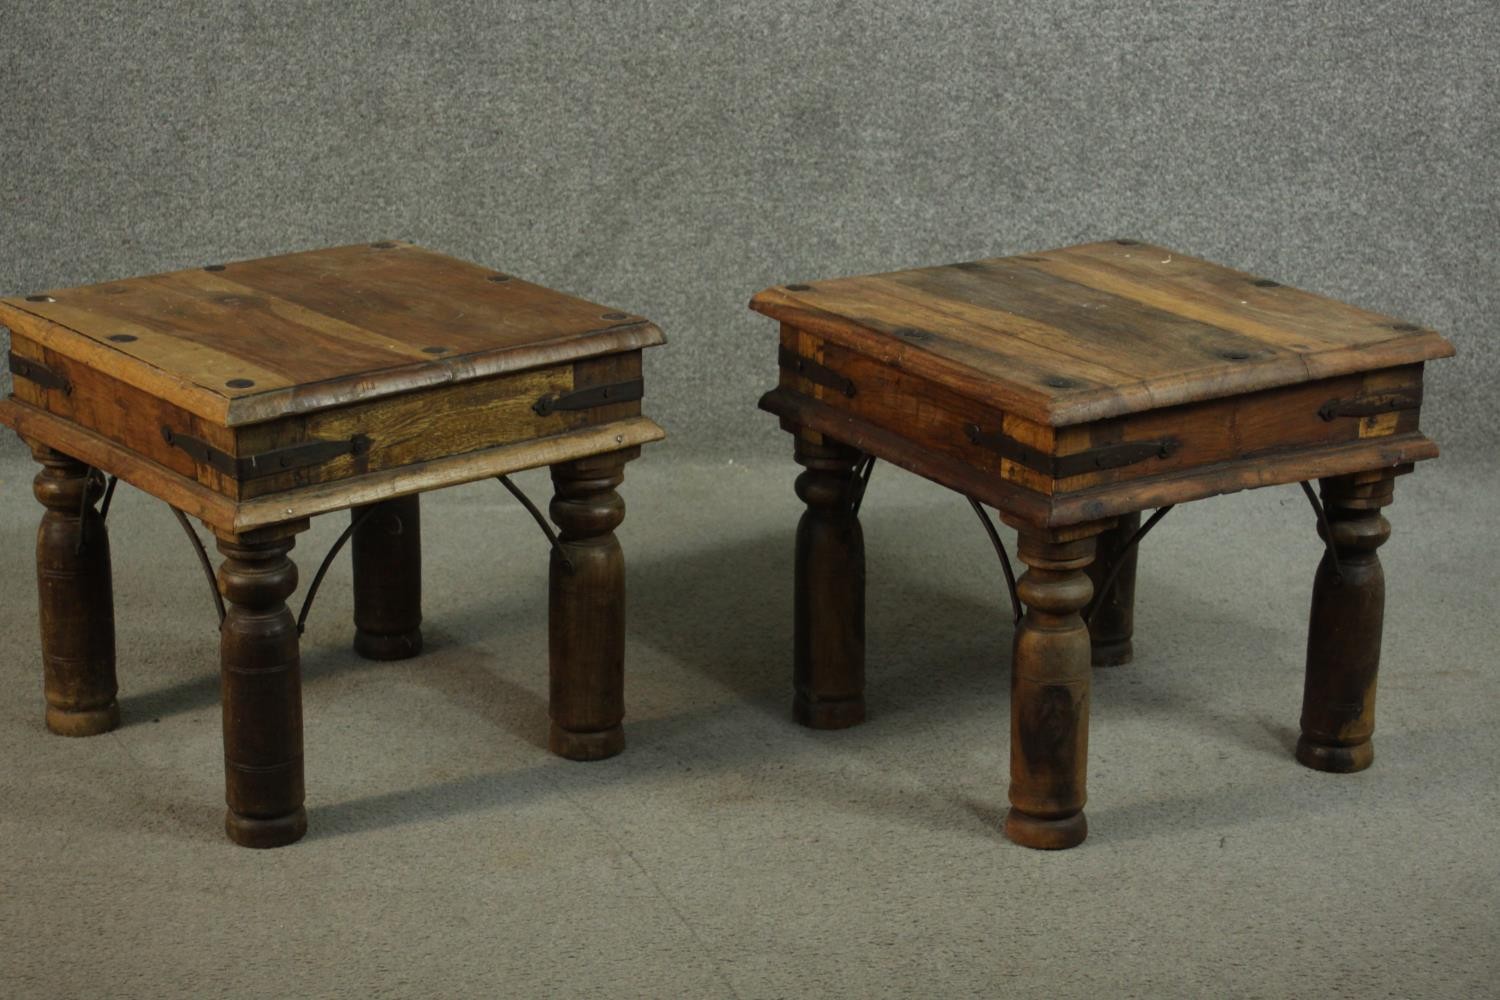 A pair of small Indian sheesham wood coffee tables, the square top with studded details, over iron - Image 4 of 6